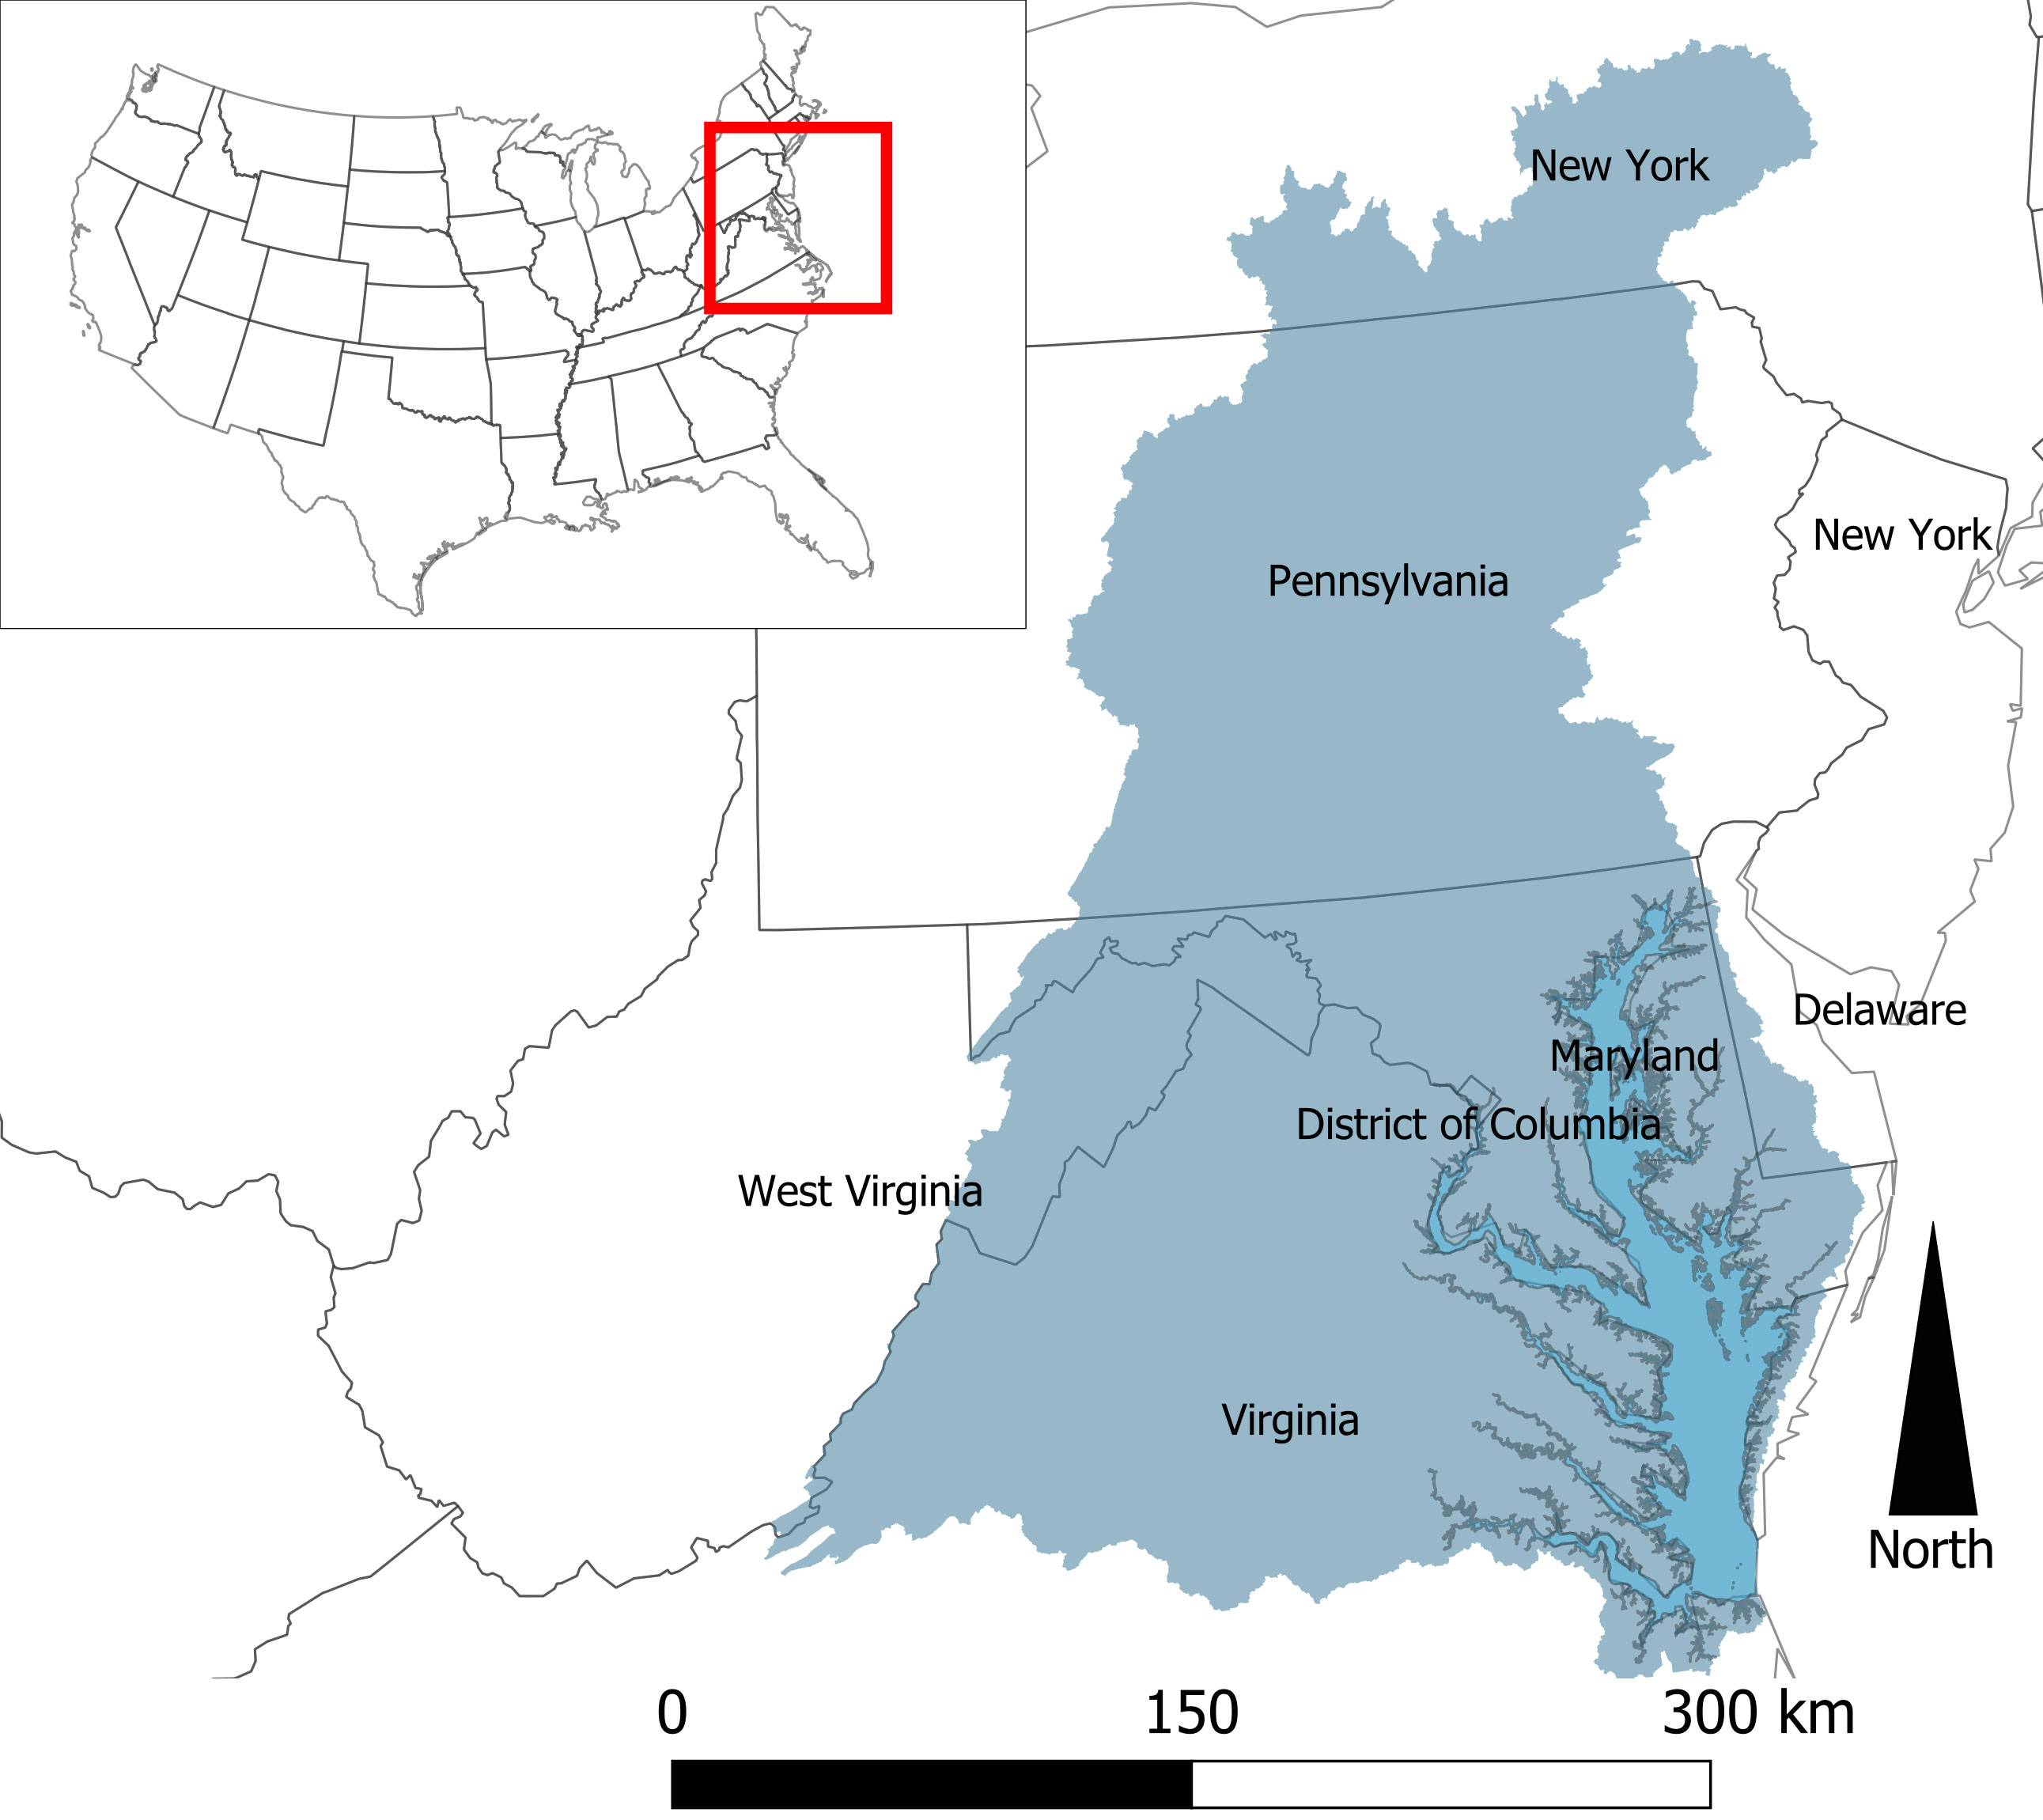 Socio-ecological analysis of the eutrophication in Chesapeake Bay, USA